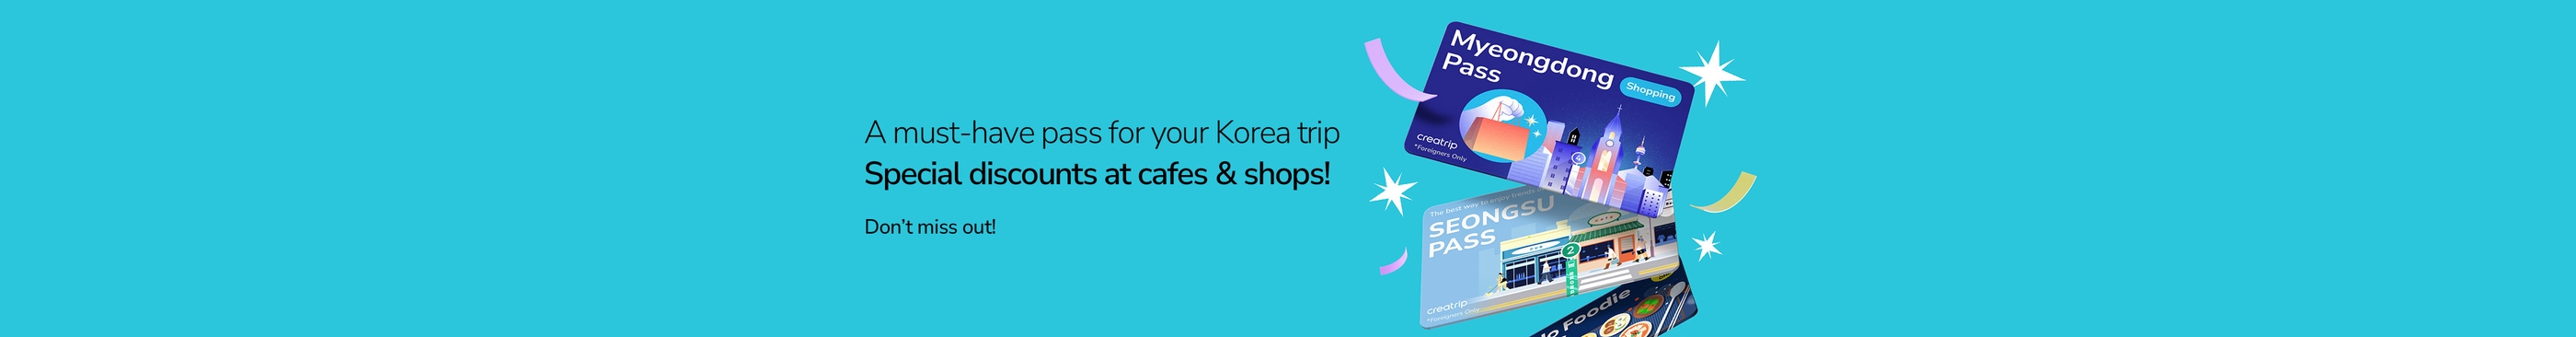 A must-have pass for your Korea trip